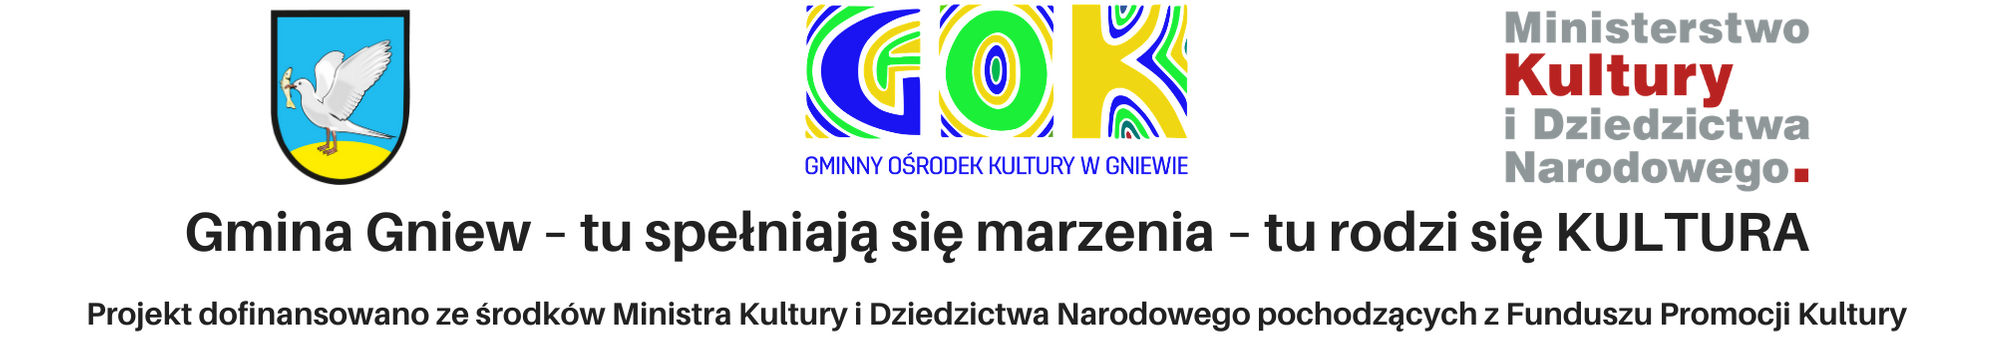 Baner projektowy.png